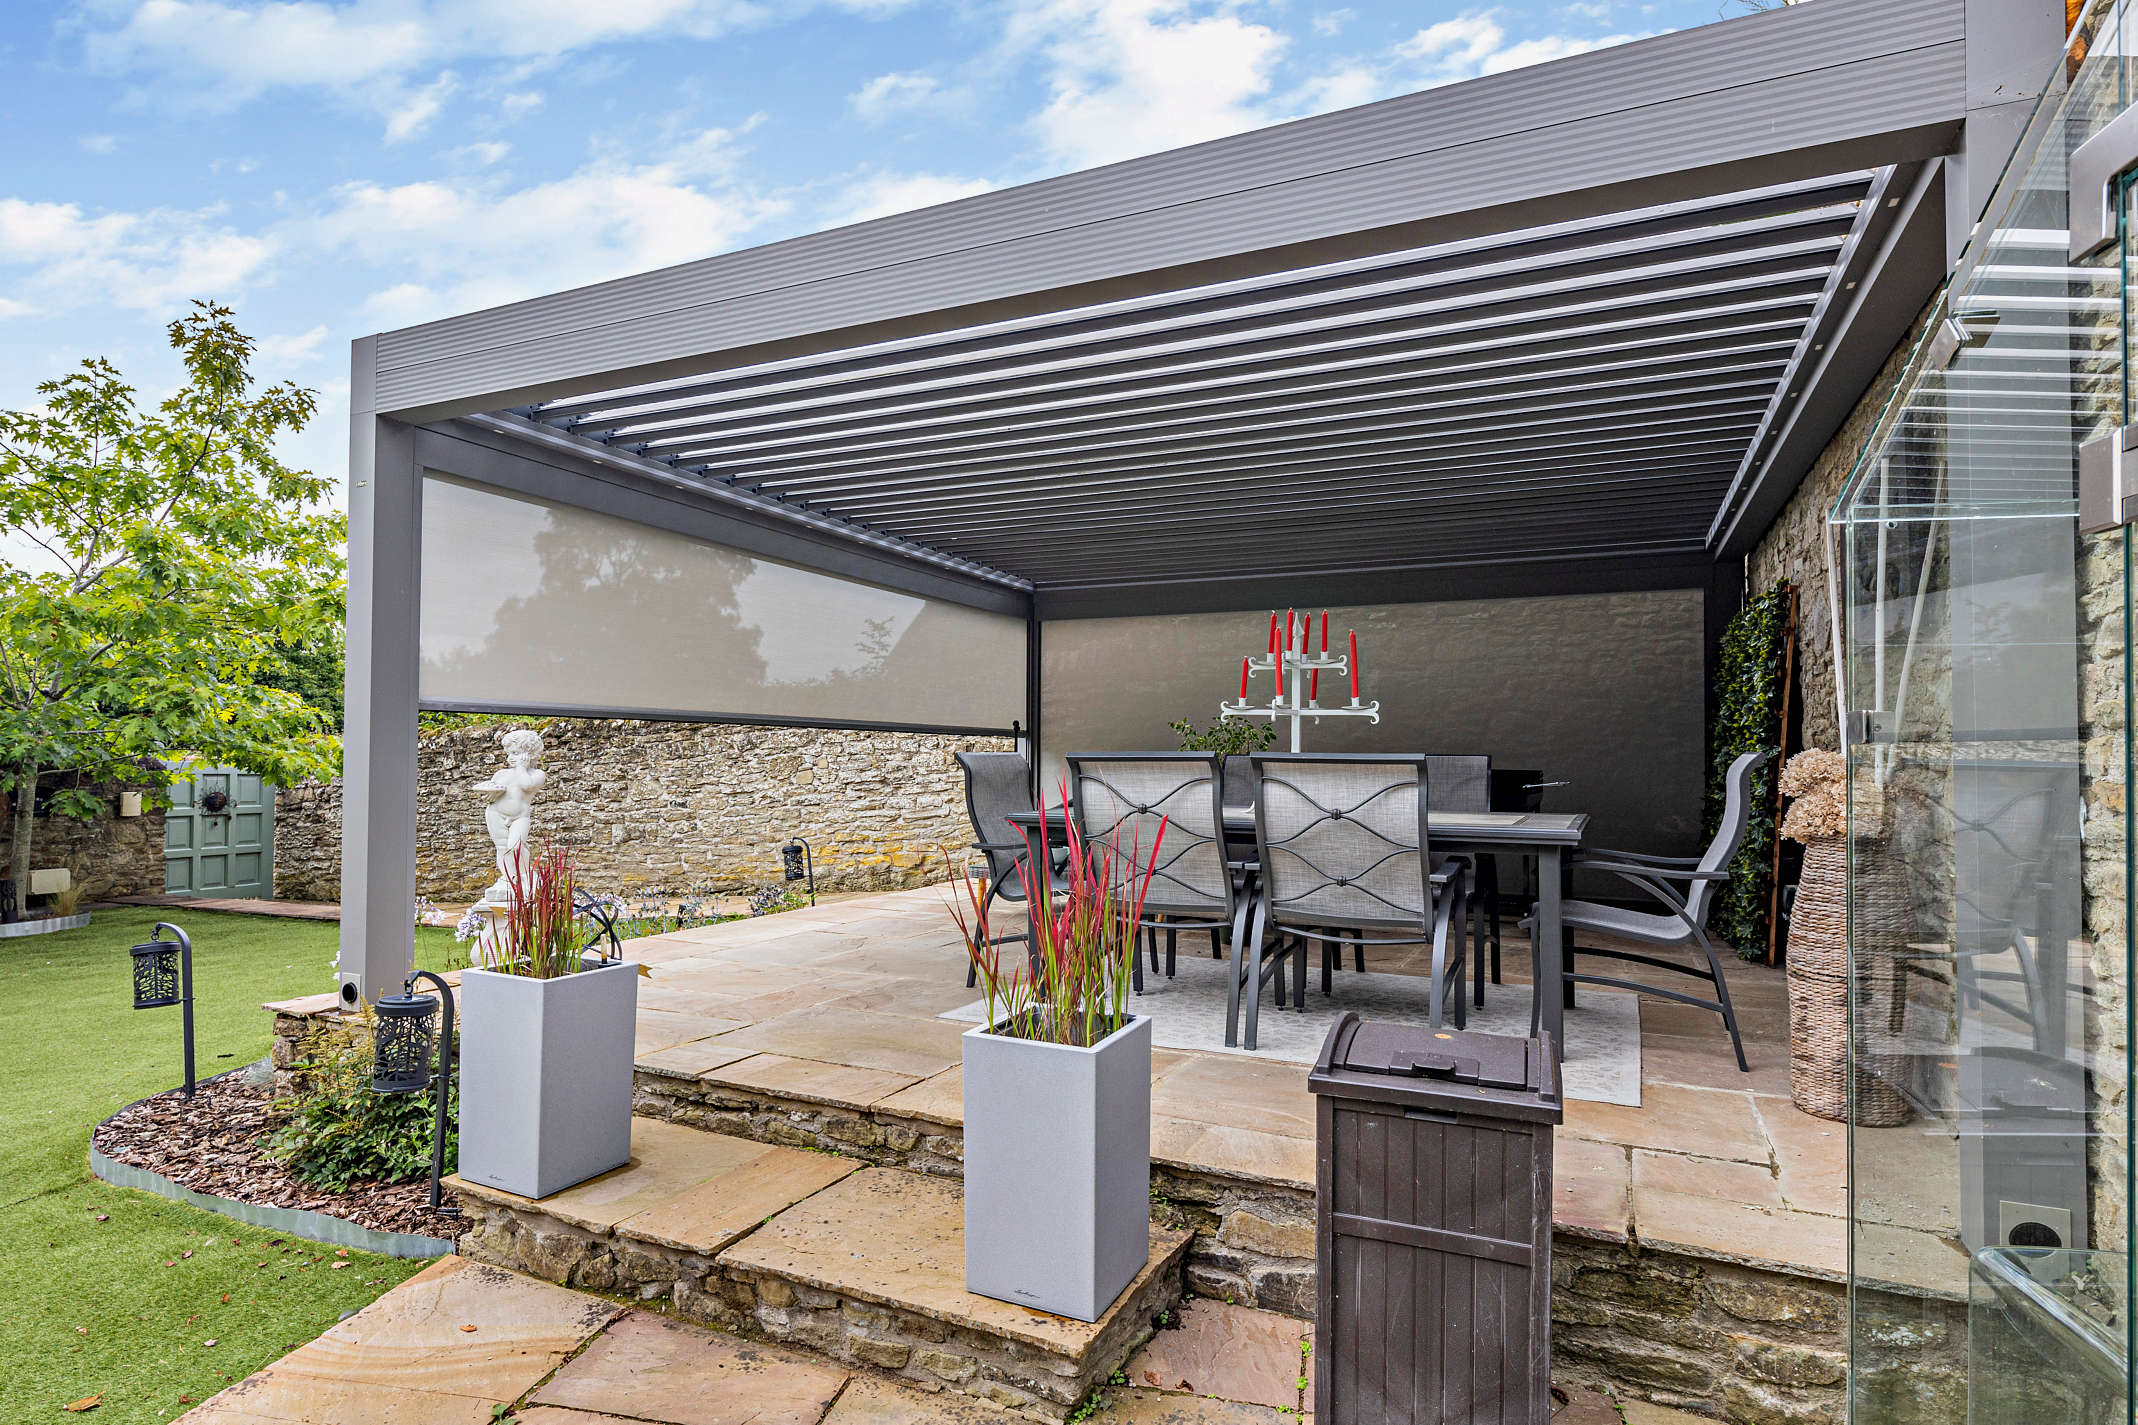 Freestanding 3m x 3m louvered roof system